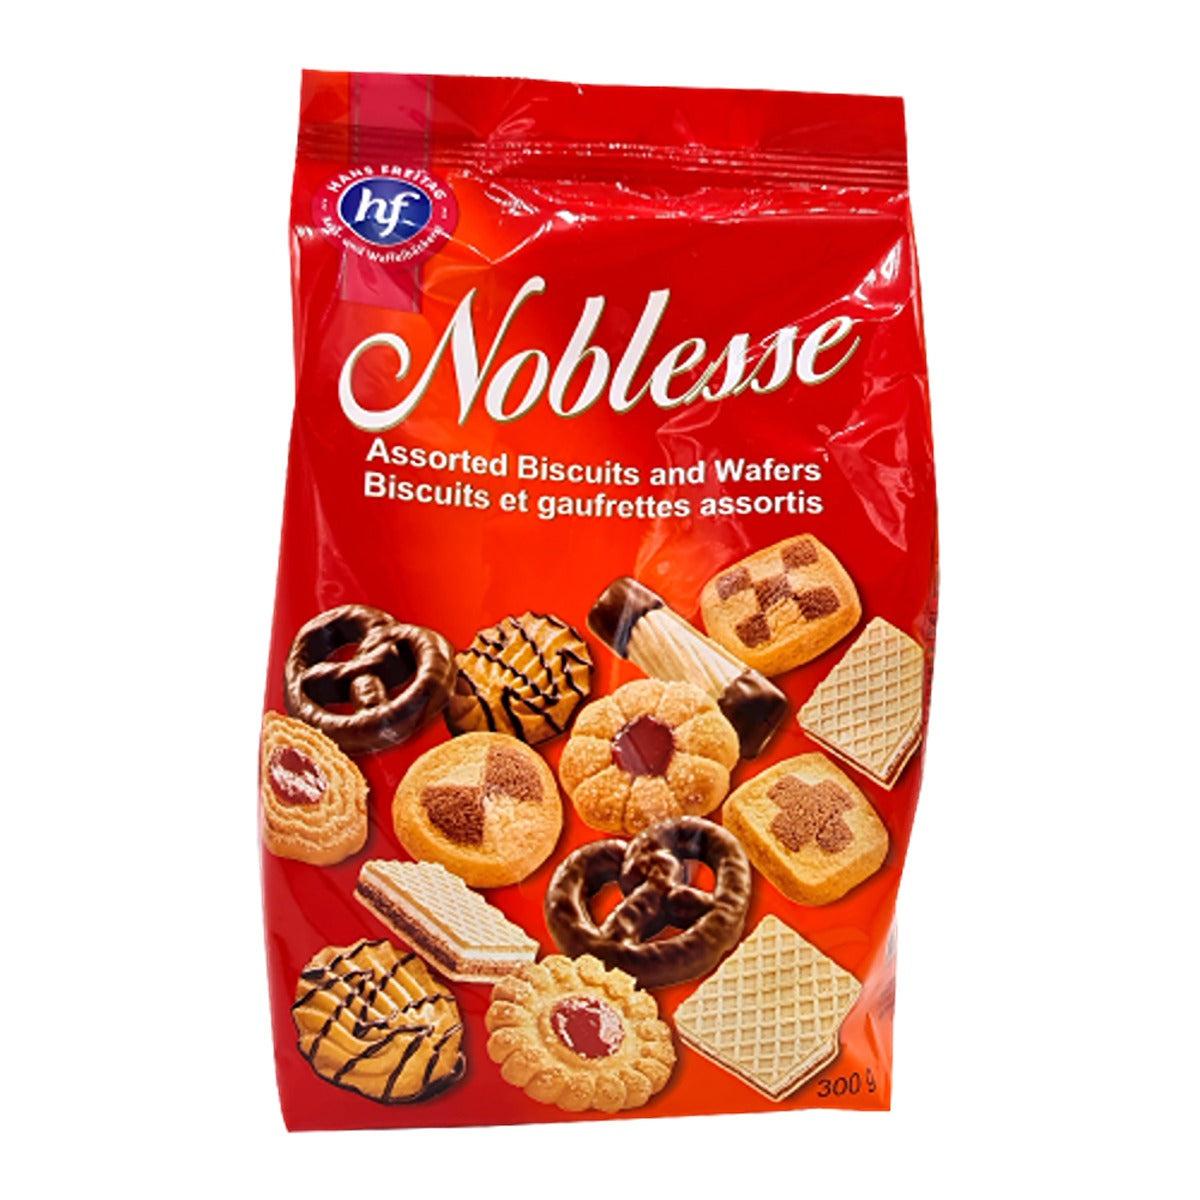 Noblesse - Assorted Biscuits & Wafers - 300g - Continental Food Store